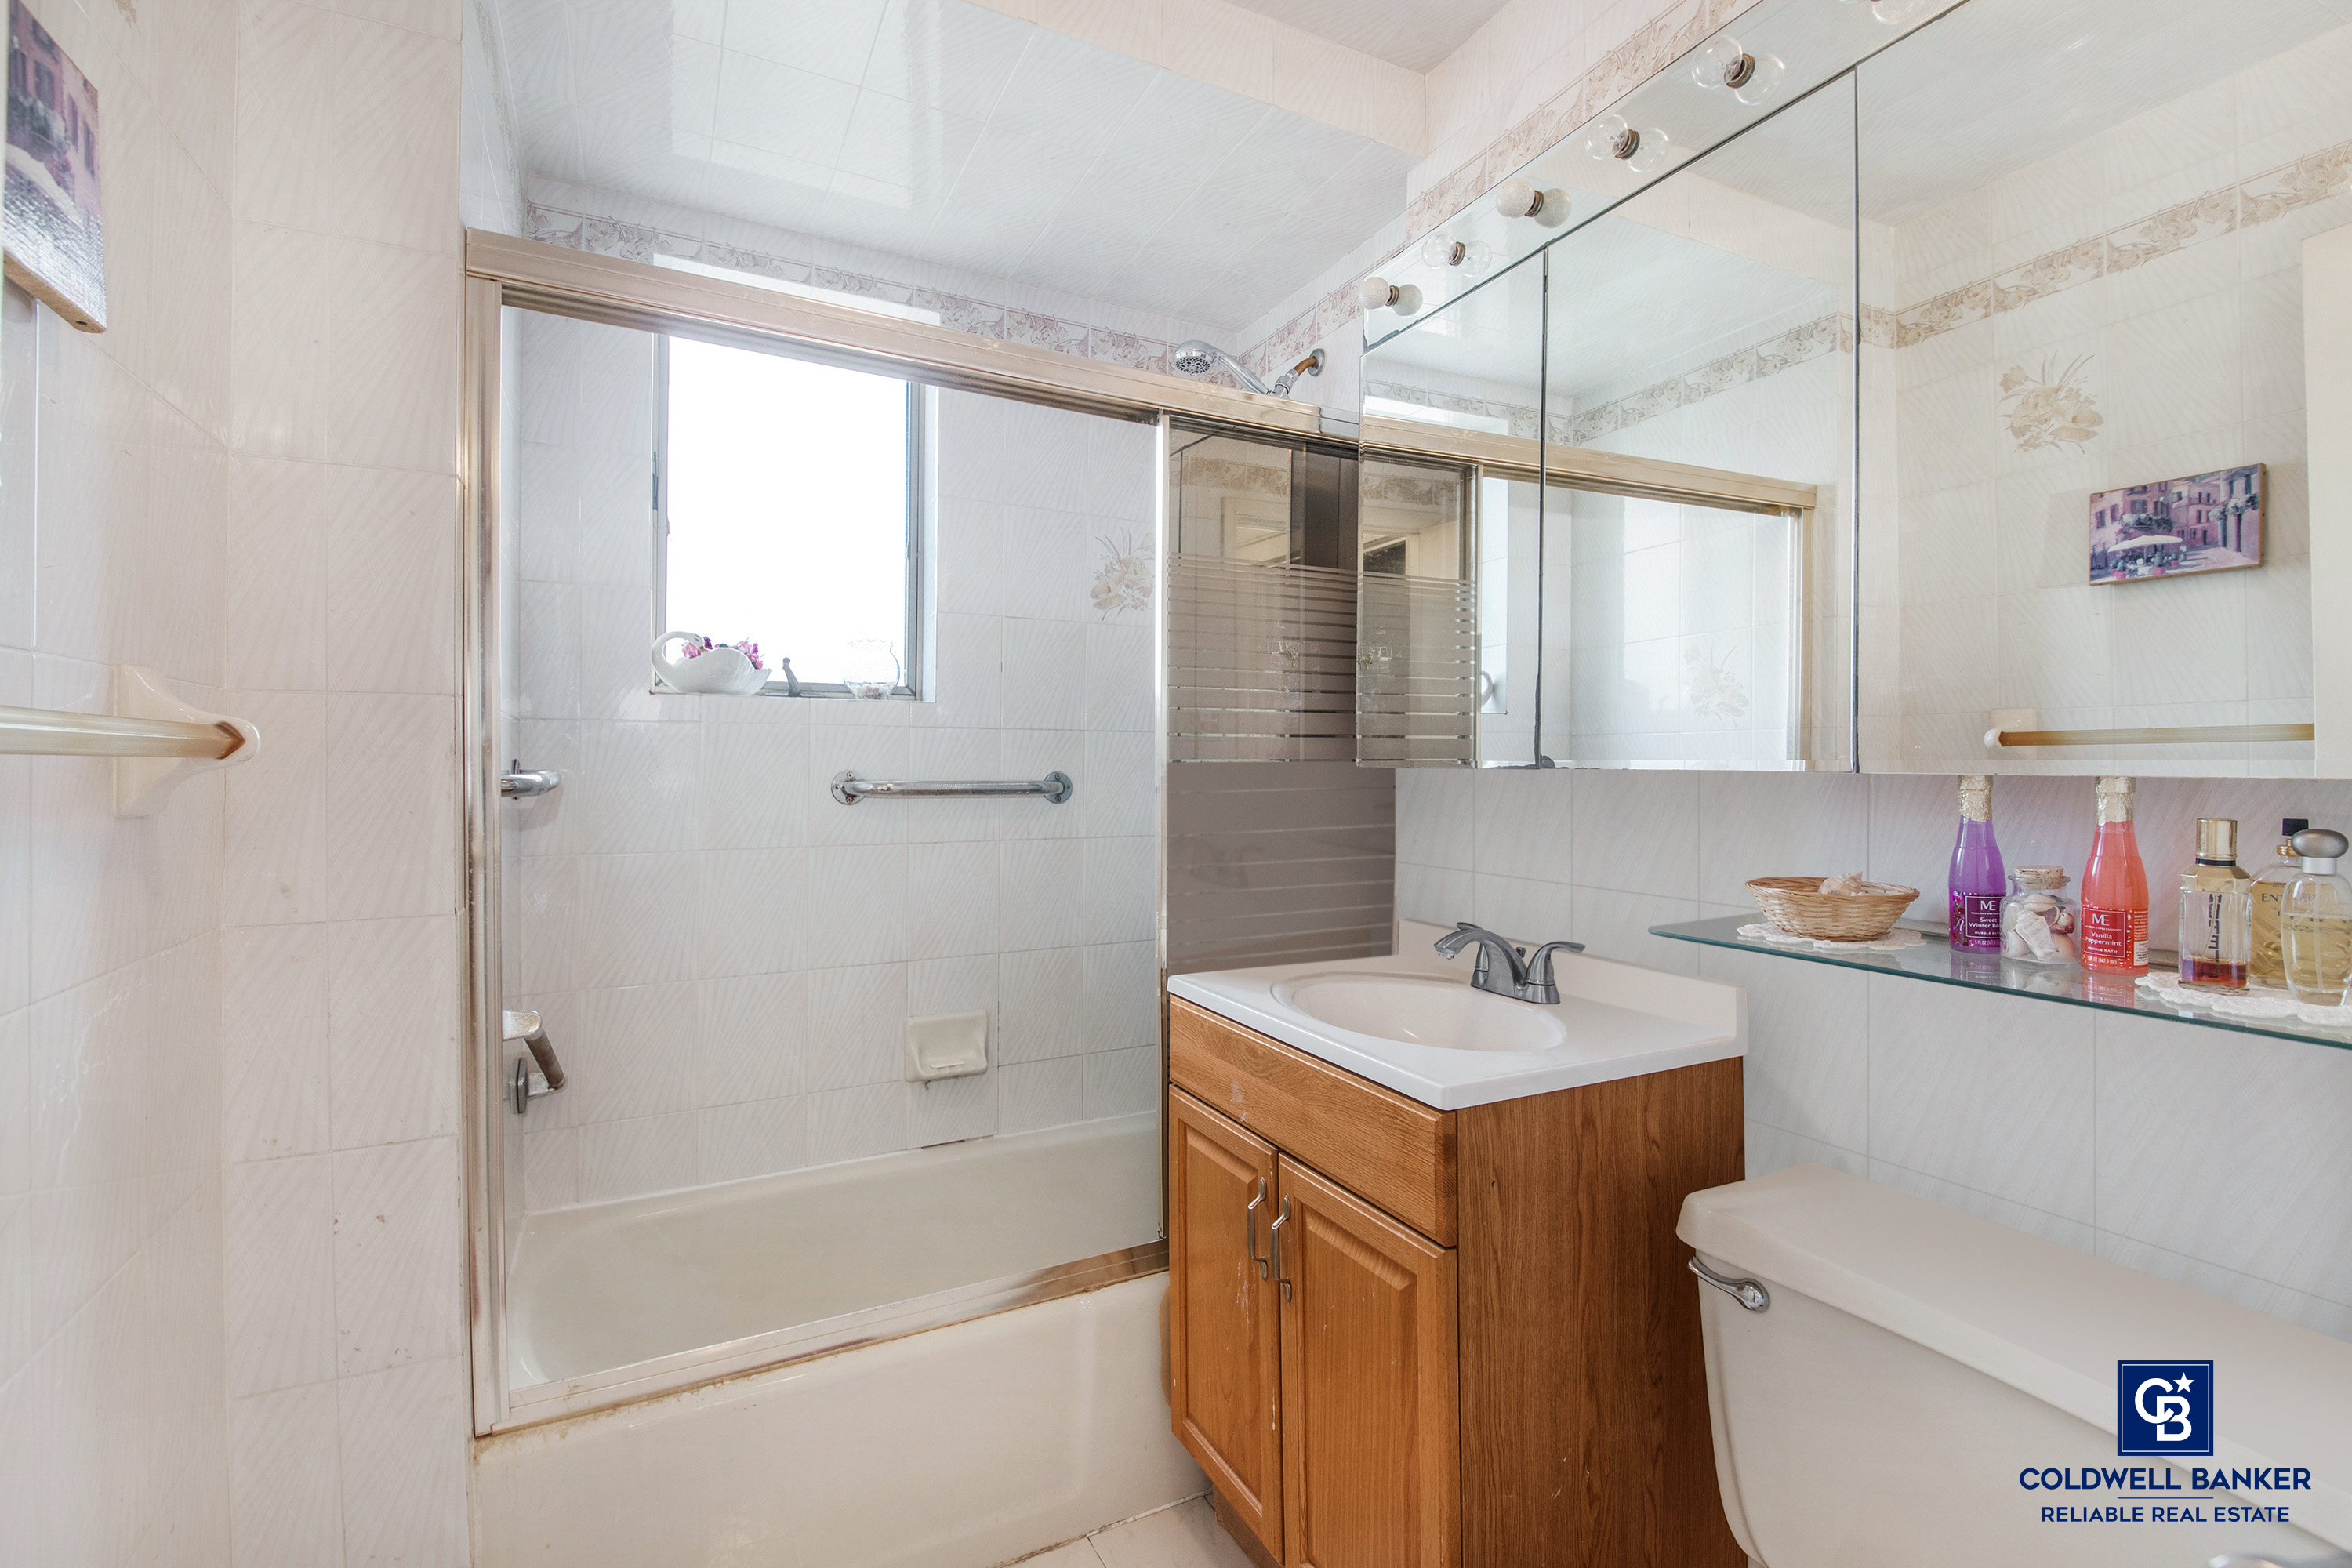 1139 79th ST, Brooklyn, New York, 11228, United States, 3 Bedrooms Bedrooms, ,2 BathroomsBathrooms,Residential,For Sale,1139 79th ST,1473183